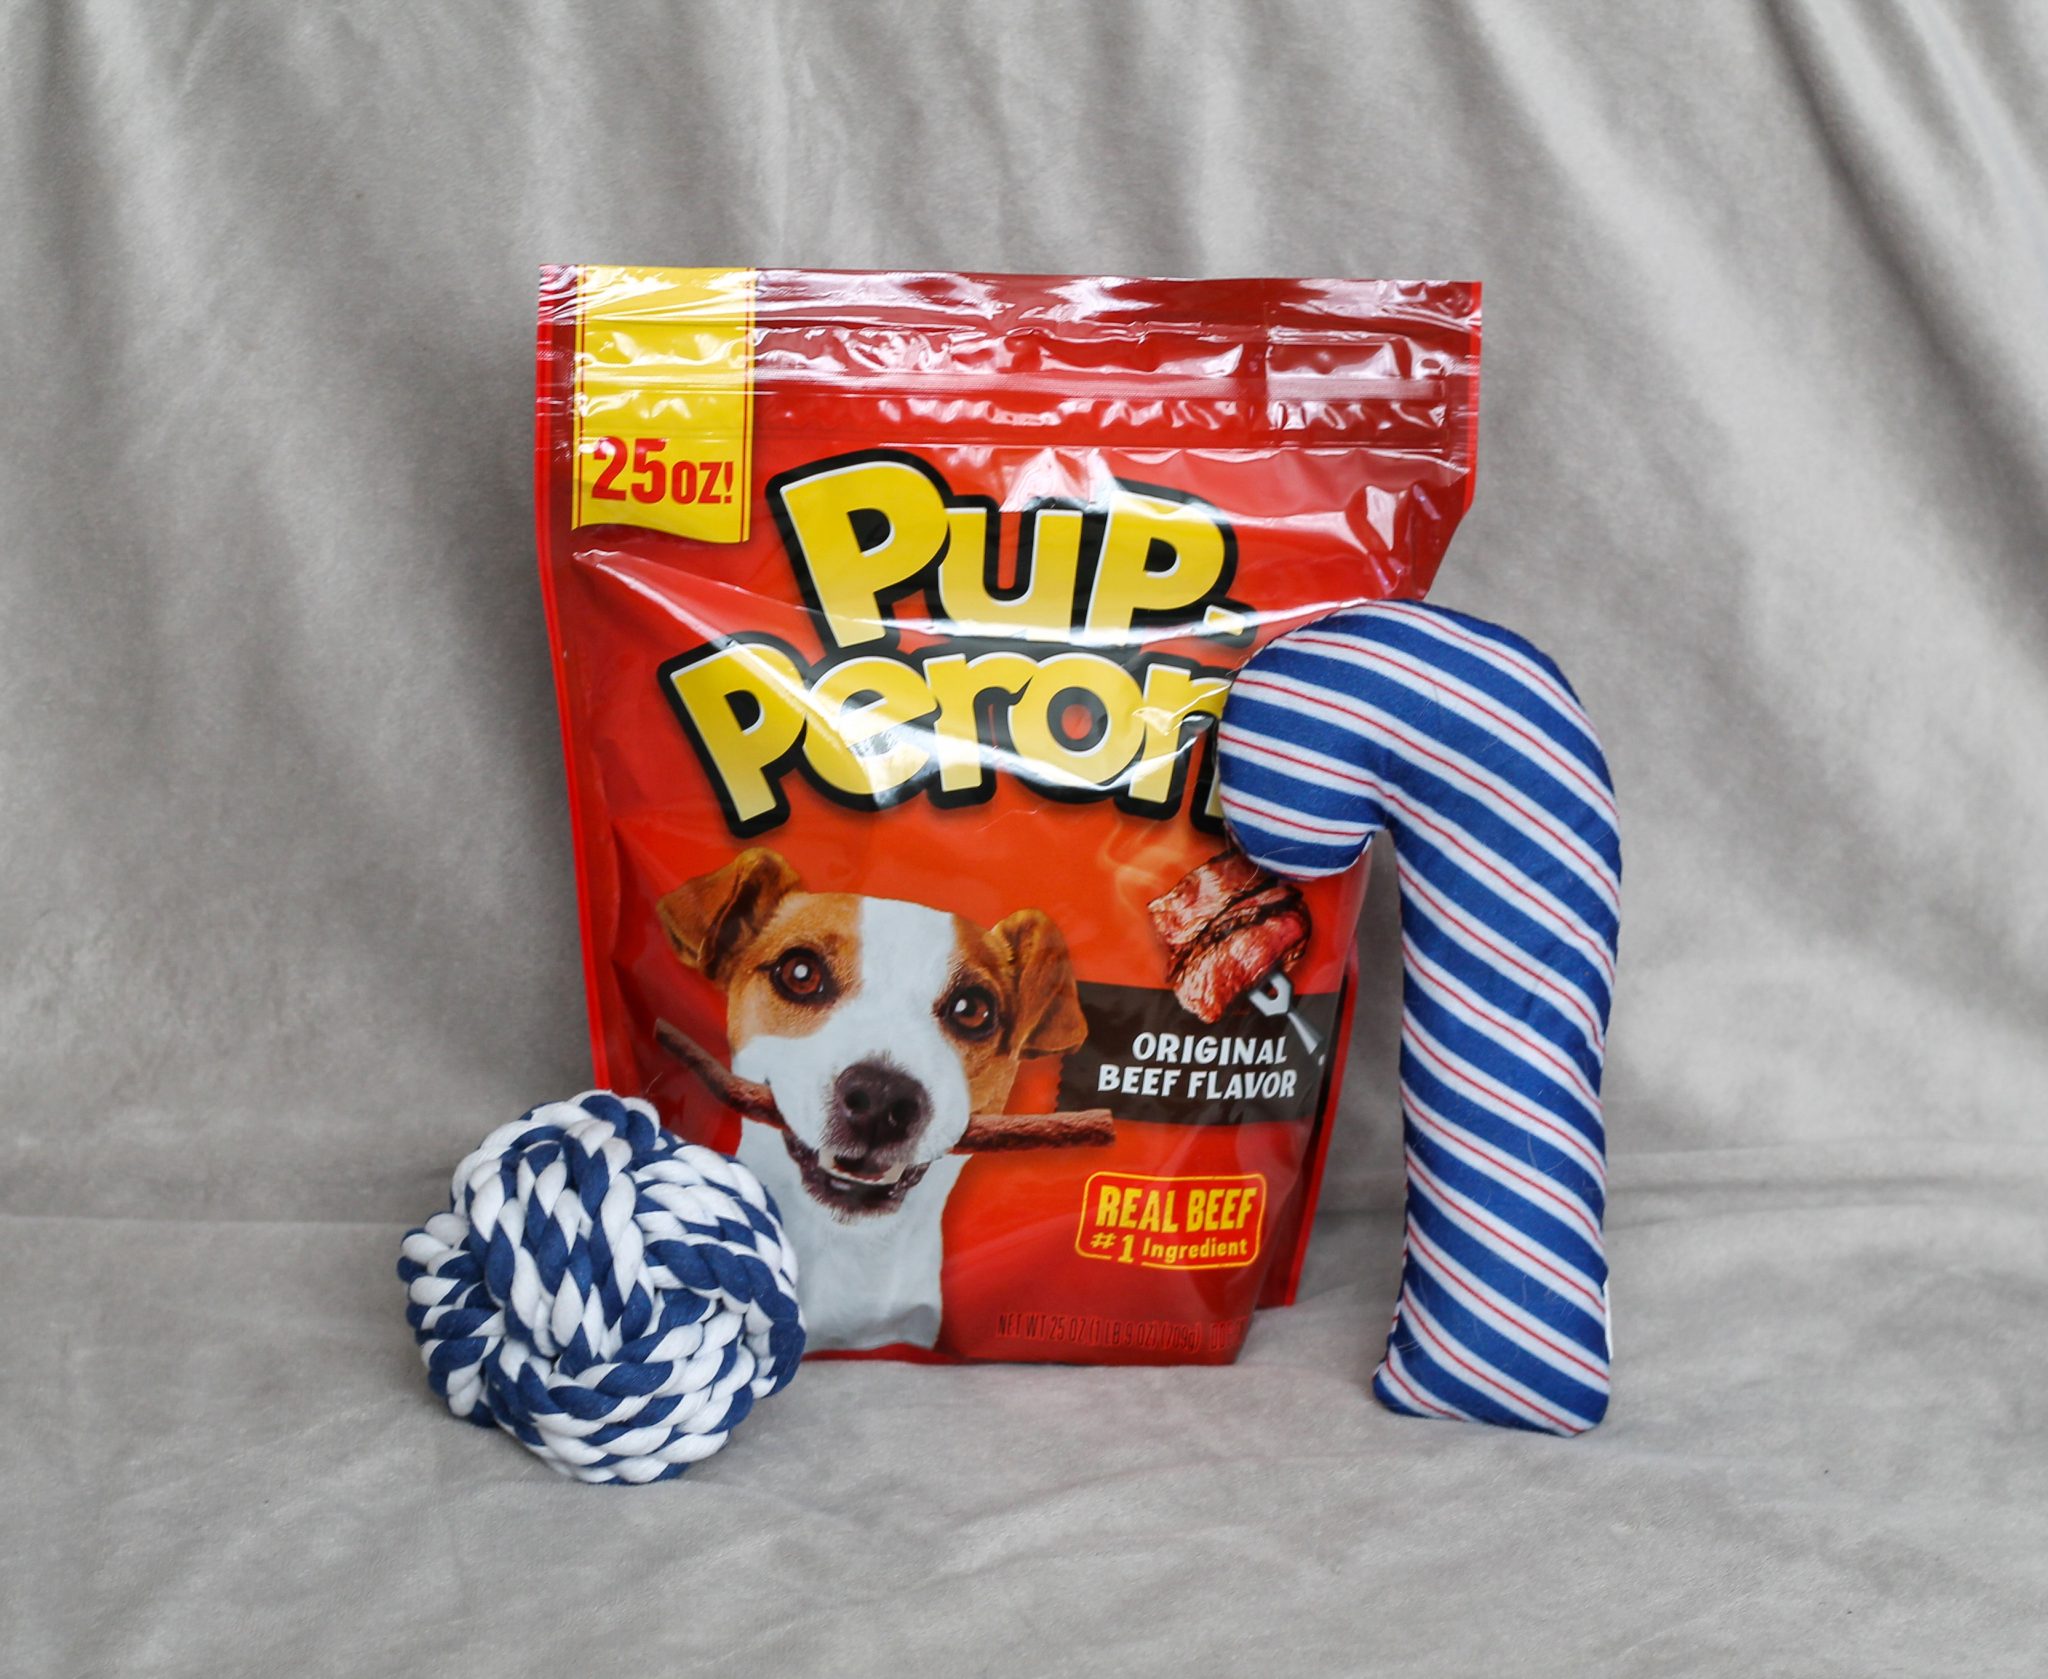 How to Assemble the Perfect Present for Your Pup